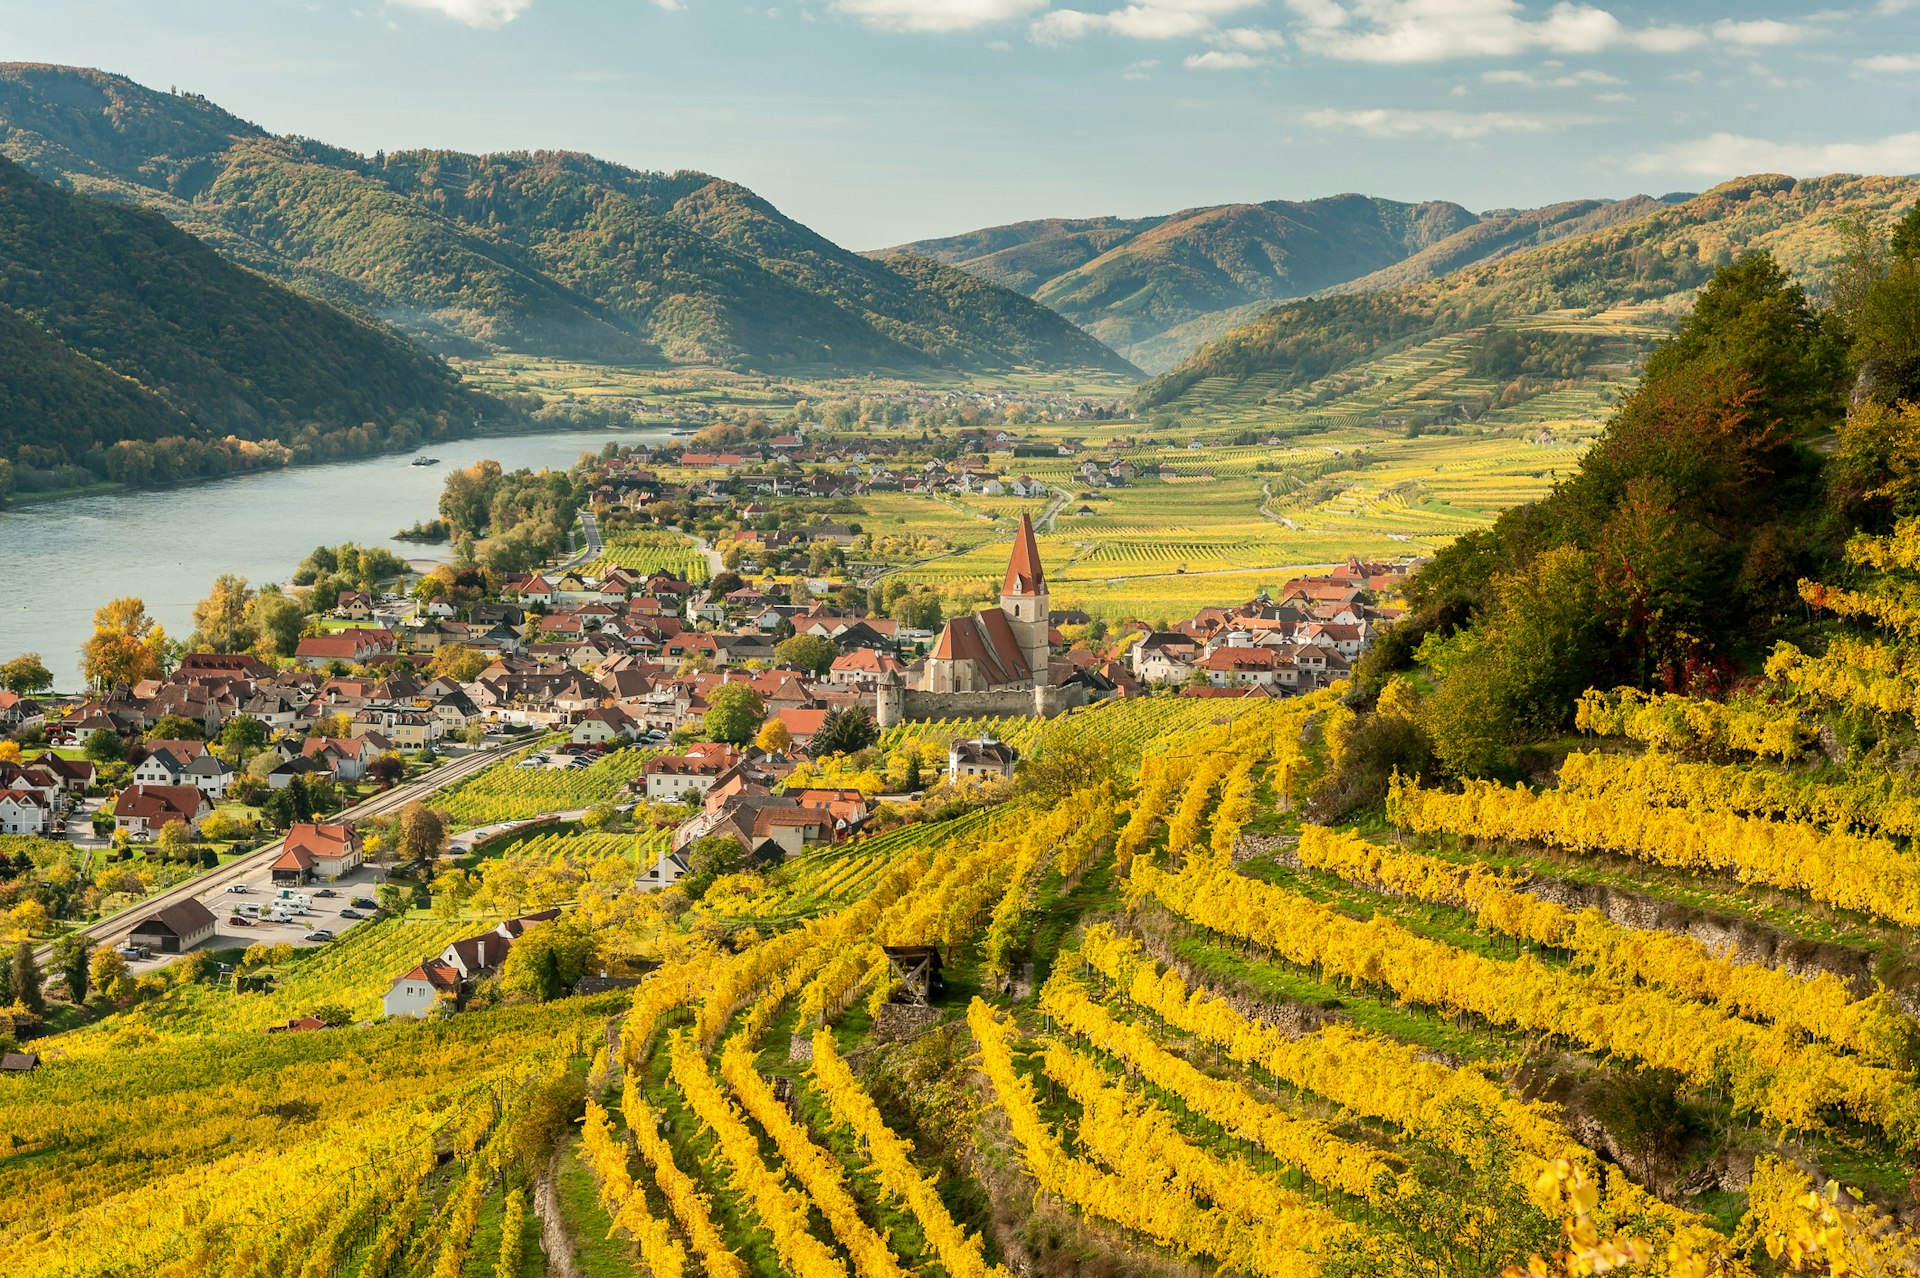 A small riverside village with autumn colored leaves on the surrounding vineyards 